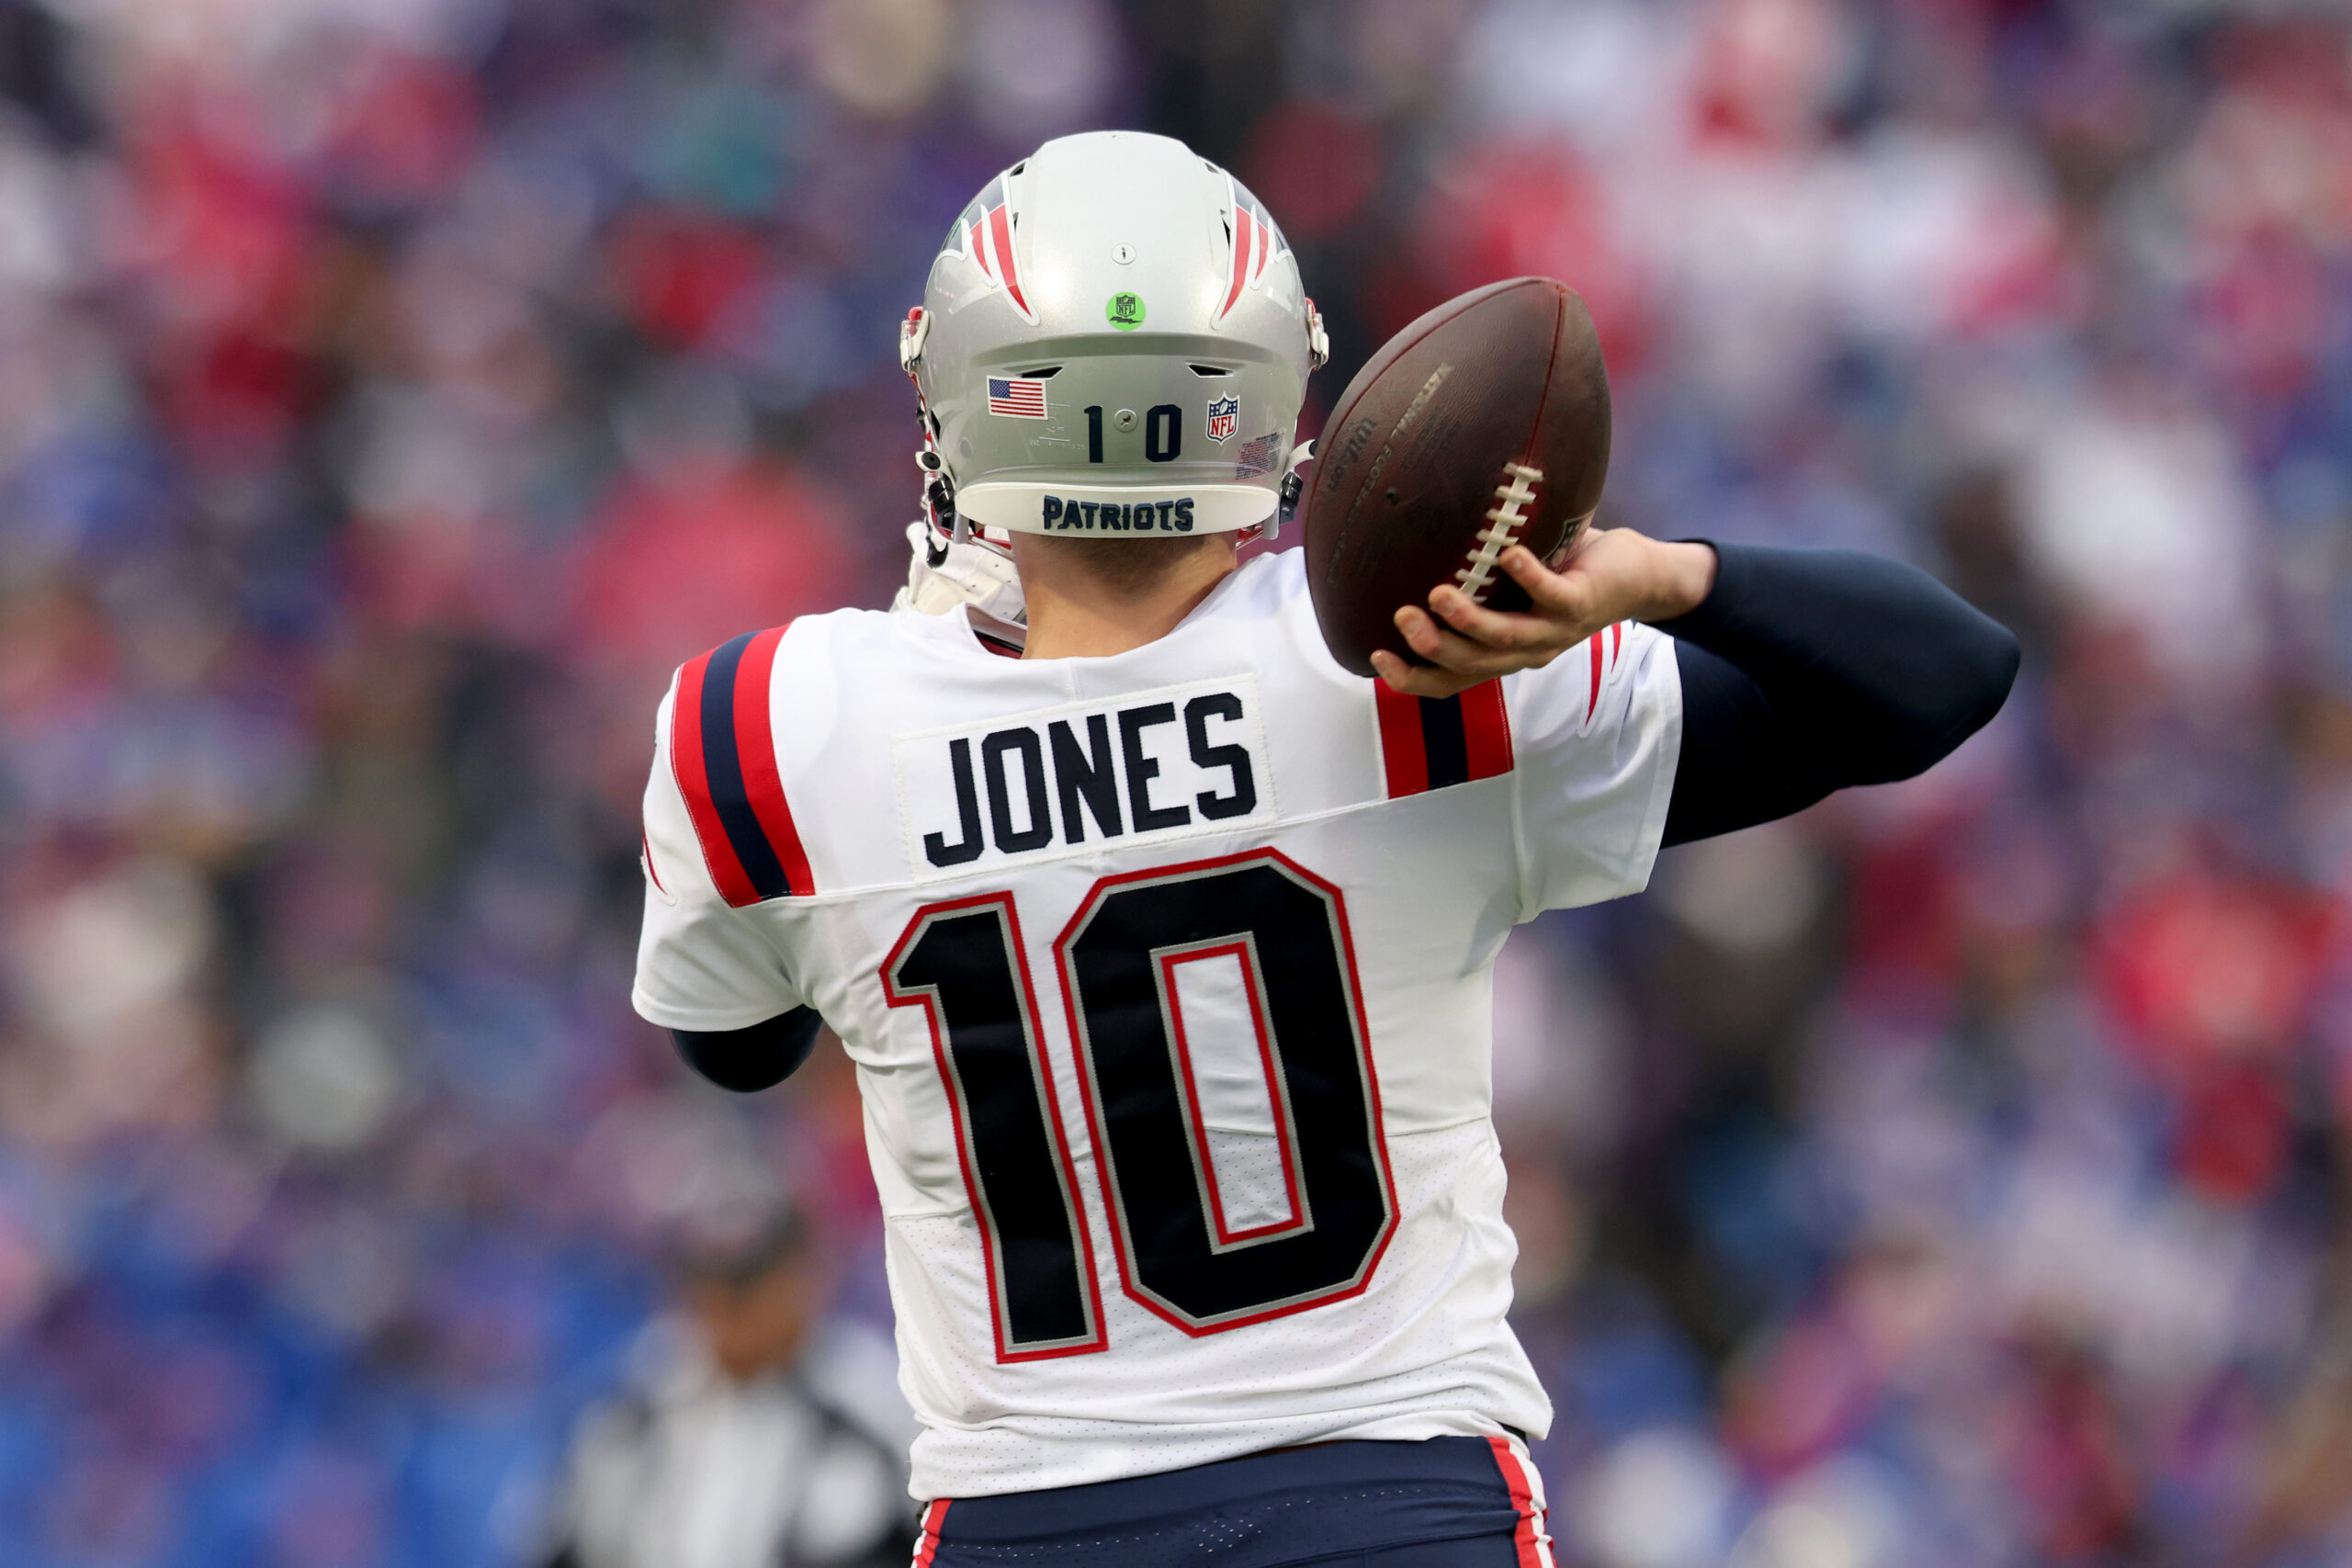 ORCHARD PARK, NEW YORK - JANUARY 08: Mac Jones #10 of the New England Patriots during the first quarter against the Buffalo Bills at Highmark Stadium on January 08, 2023 in Orchard Park, New York. (Photo by Bryan Bennett/Getty Images)